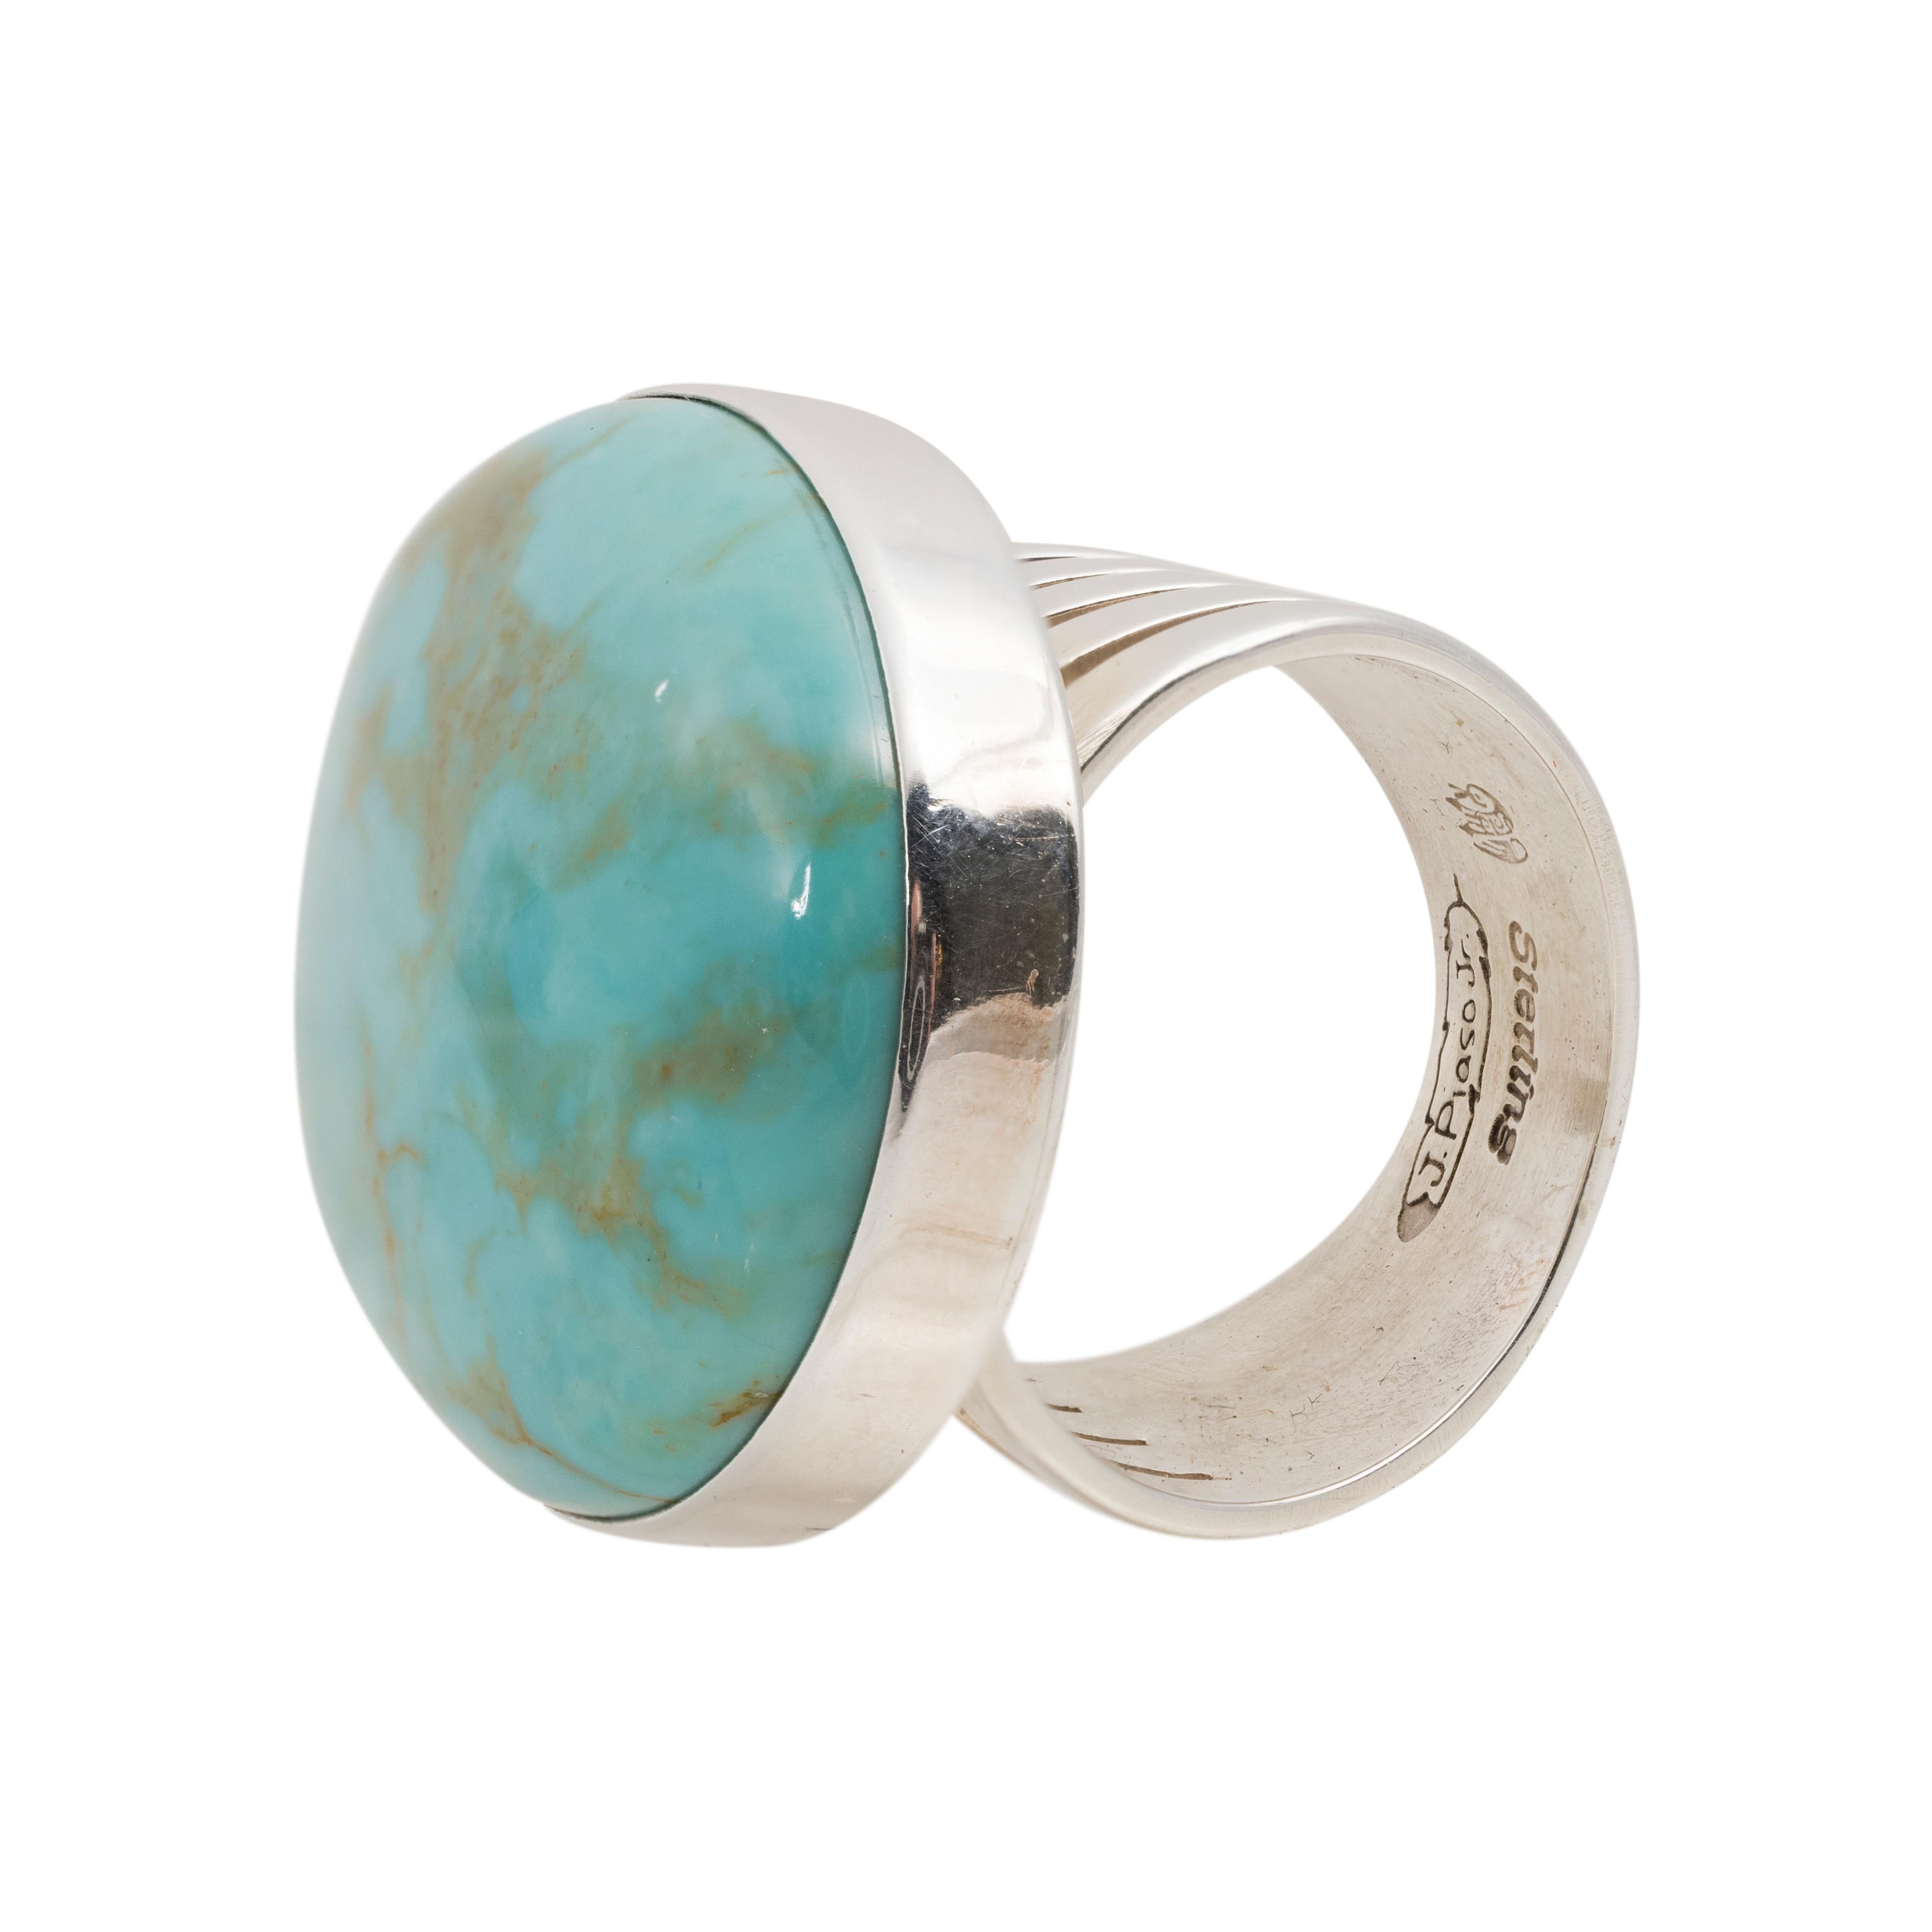 Navajo Carlin turquoise and sterling ring. Beautiful stone set in sterling silver, wide band with slash marks on sides.  Stamped 